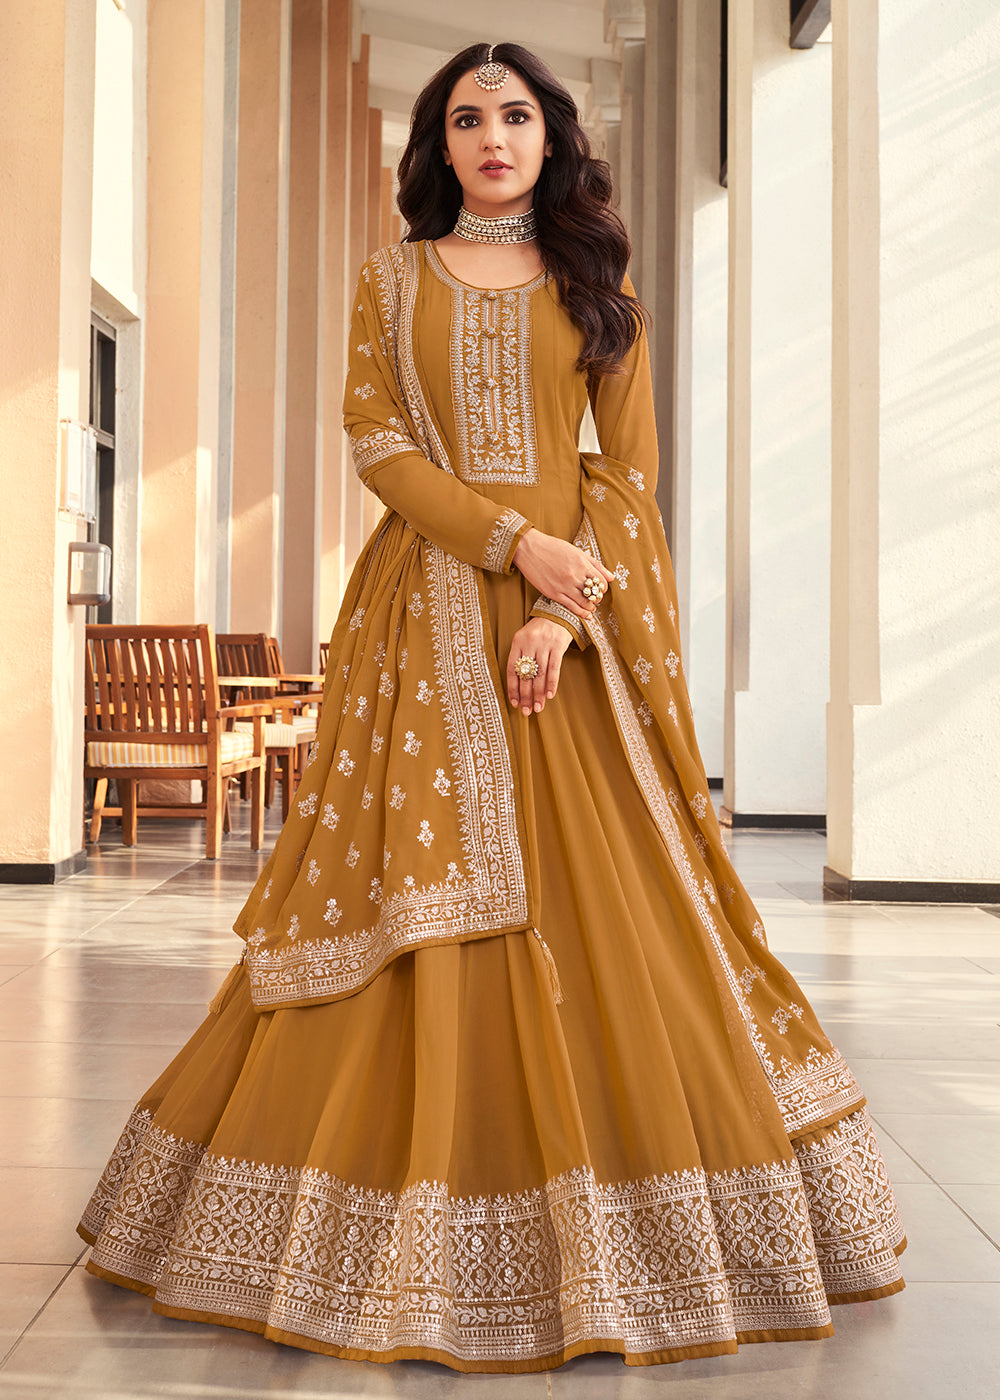 Buy Now Georgette Mustard Yellow Embroidered Indian Long Anarkali Dress Online in USA, UK, Australia, New Zealand, Canada & Worldwide at Empress Clothing.